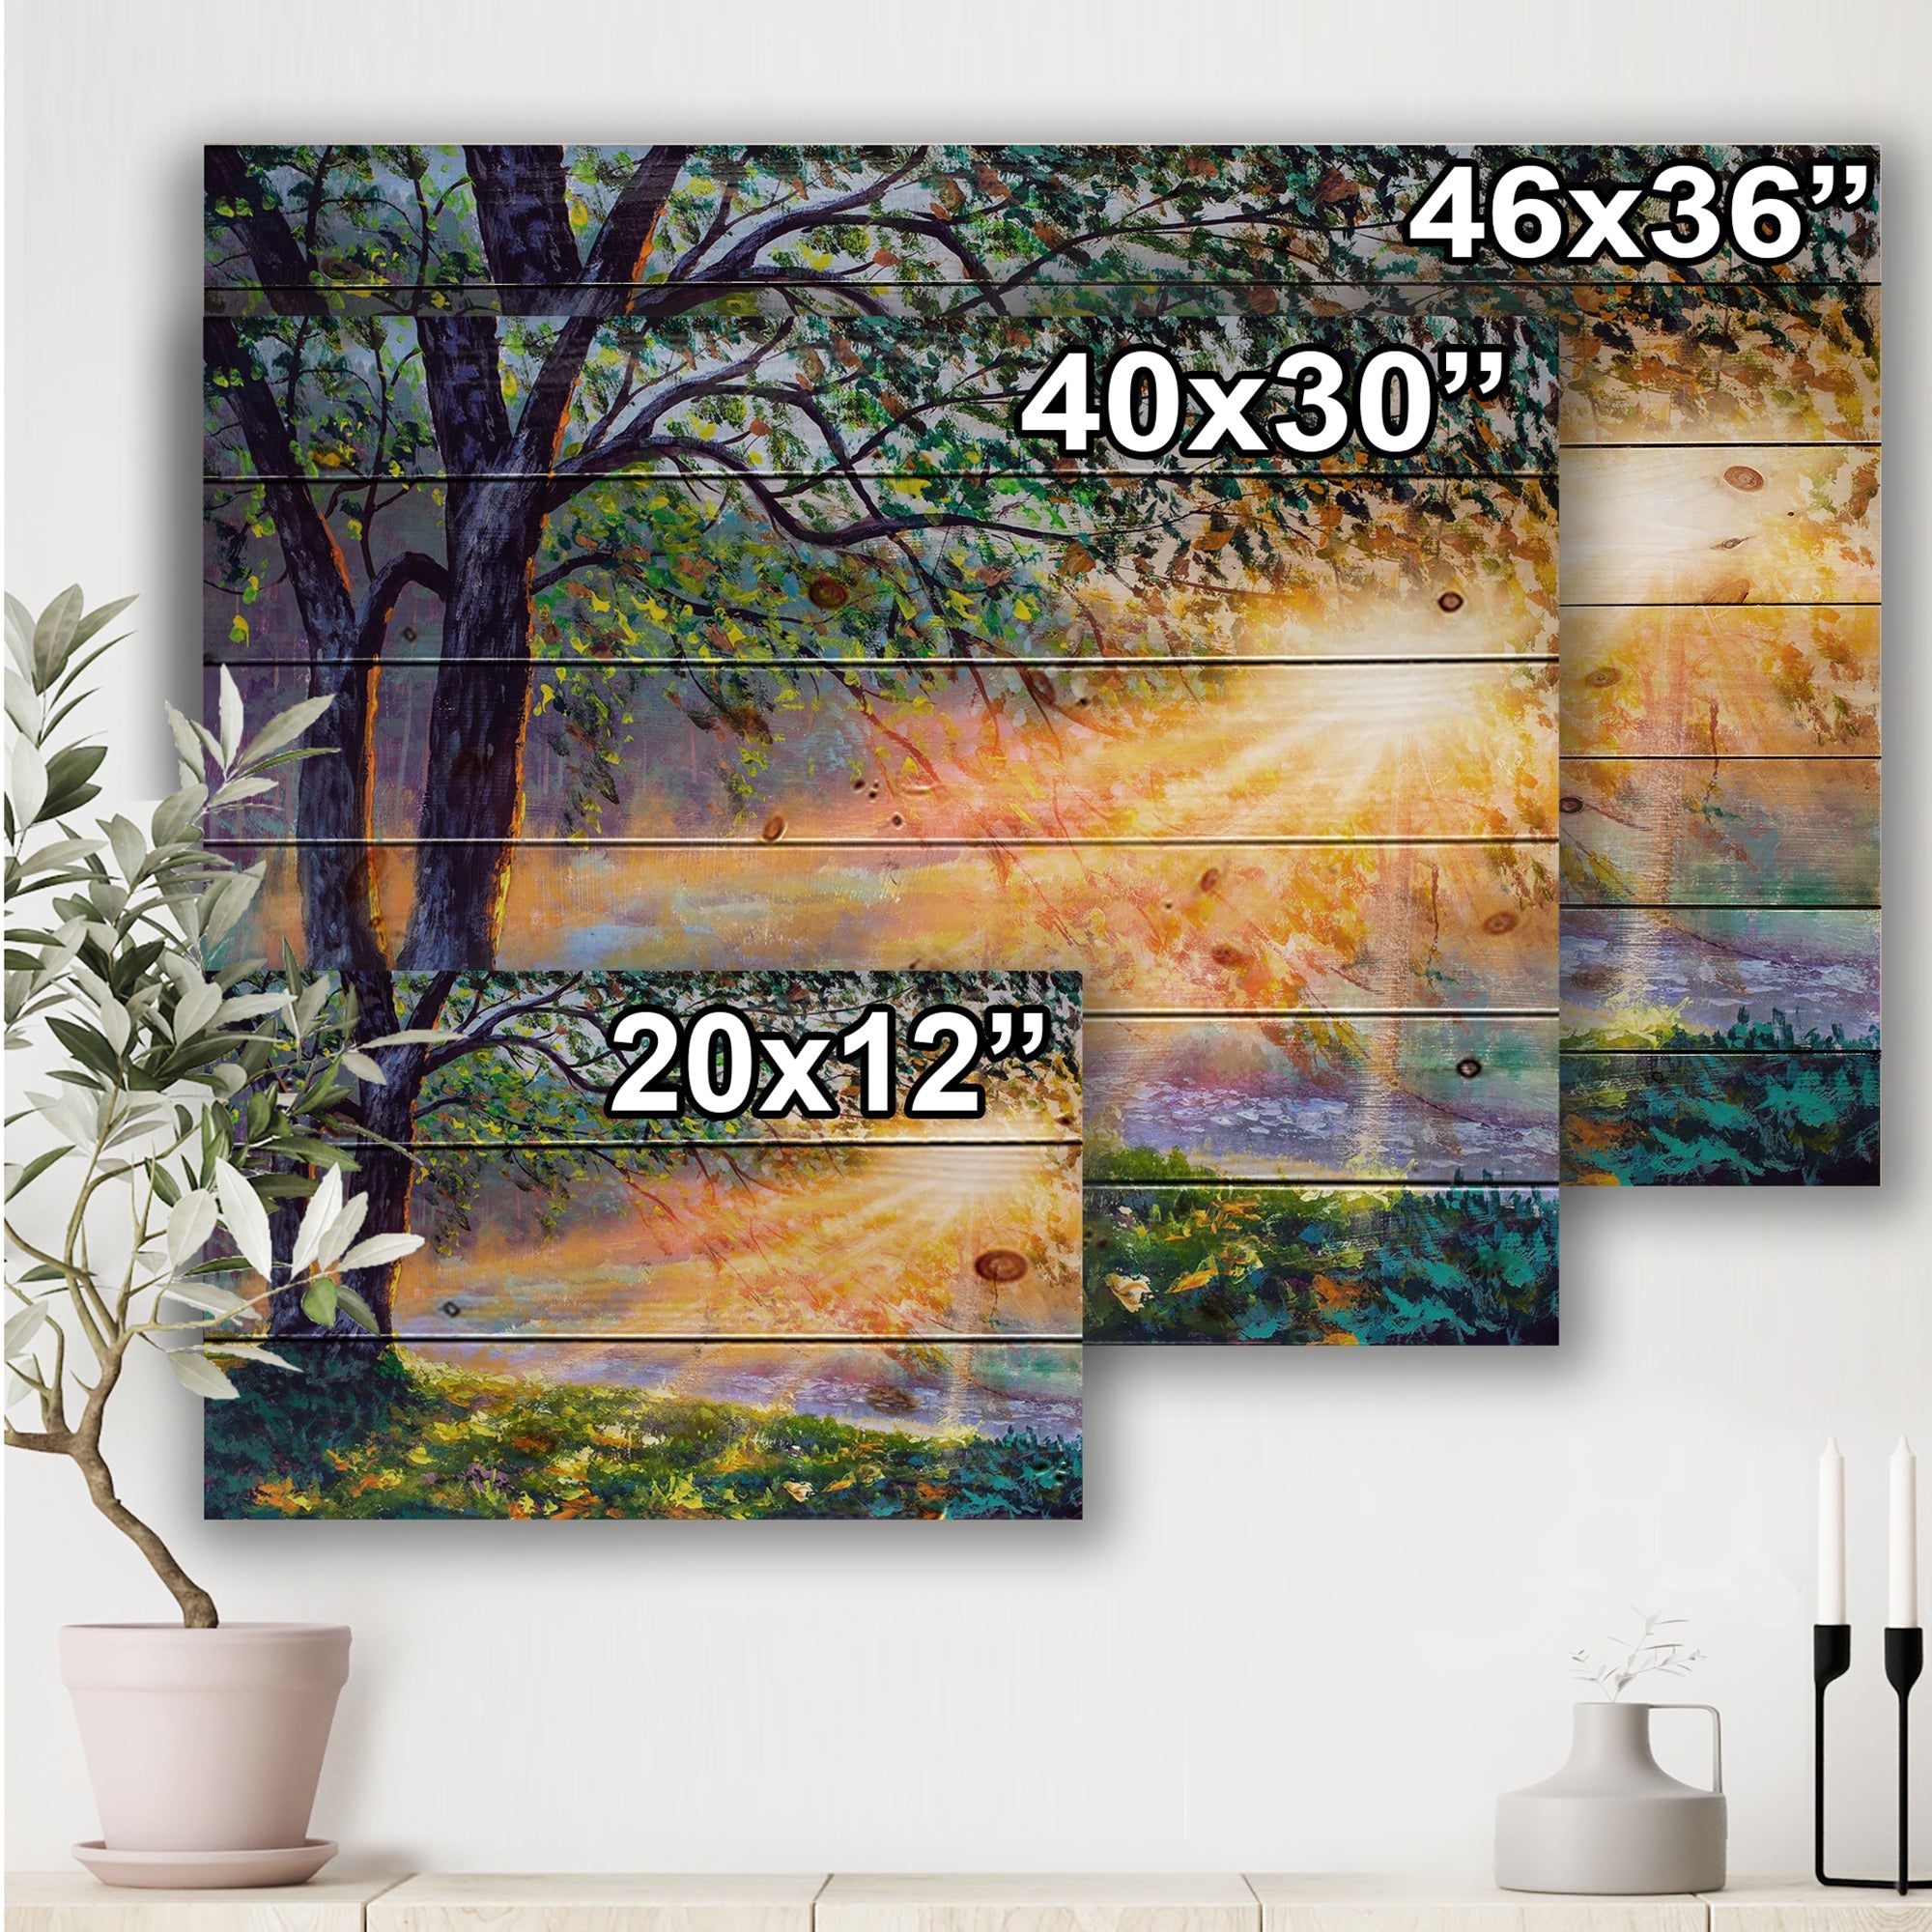 Dawn Sunshine Light By The River - Farmhouse Print on Natural Pine Wood